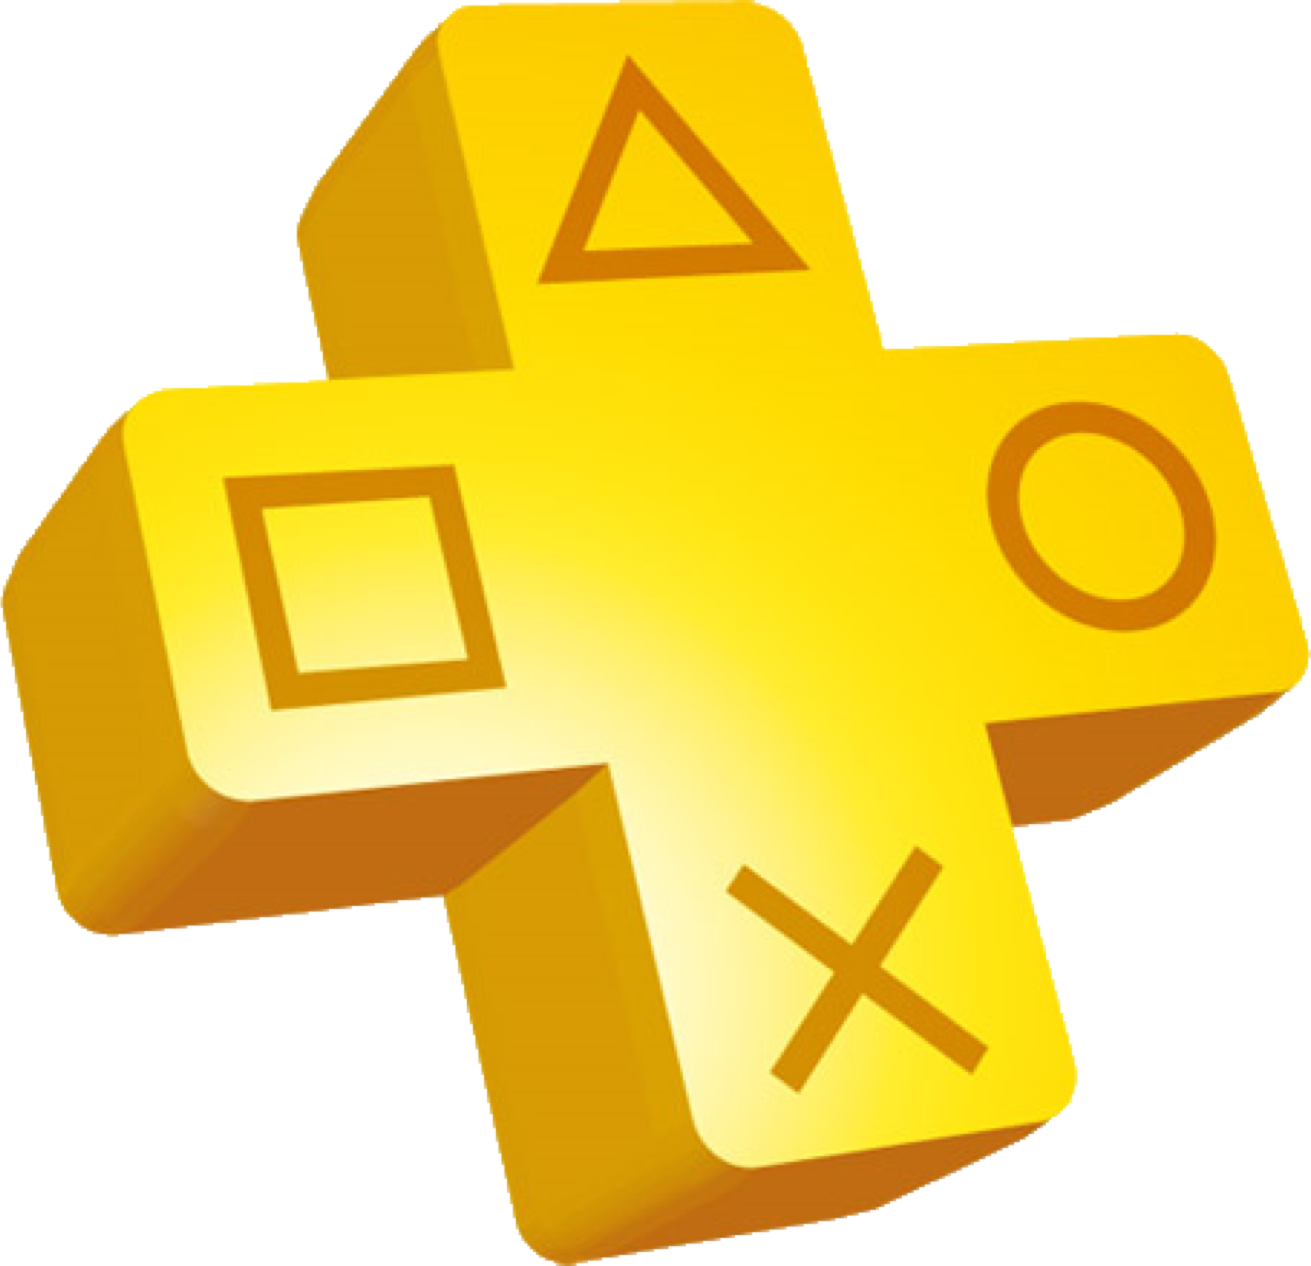 Download Playstation Png Free Png Image Hq Png Image